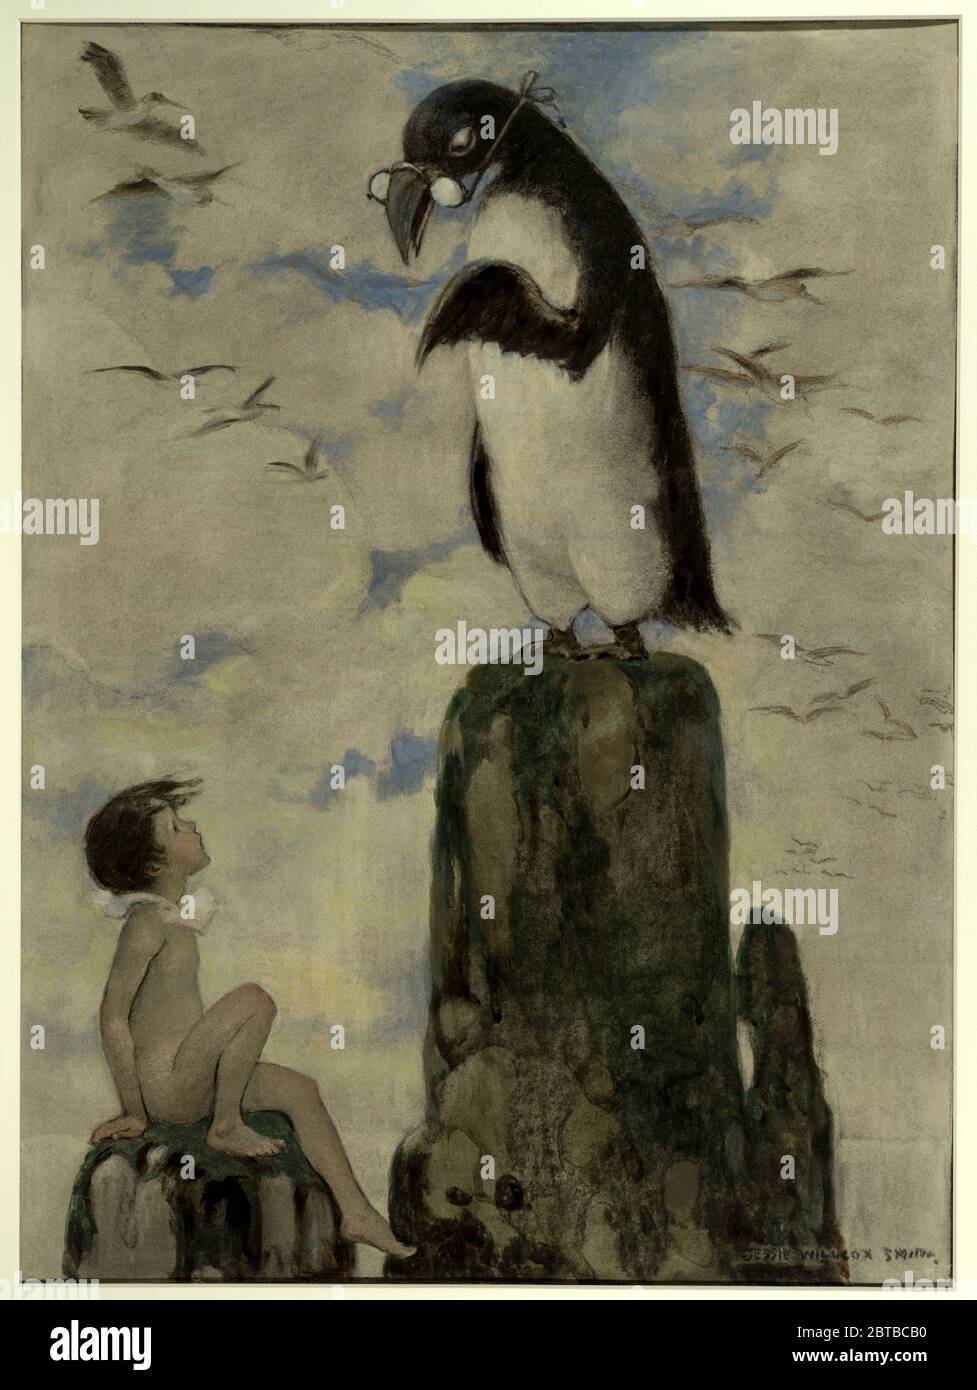 1916 , USA : The british CHARLES KINGSLEY ( 1819 - 1875 ), priest , social reformer, historian and novelist . Friend of Charles Darwin . Uncle of traveller and scientist Mary Kingsley .Illustration by Jessie Willcox SMITH ( 1863 - 1935 ) for book THE WATER BABIES (1916), NY, Dodd, Mead & co, artwork by - ILLUSTRATION - ILLUSTRAZIONE - ARTS - ARTE - SCRITTORE - WRITER - LETTERATURA - LITERATURE - WRITER - SCRITTORE - child - children - bambino - bambini - childhood - infanzia - pinguino - penguin --- ARCHIVIO GBB Stock Photo